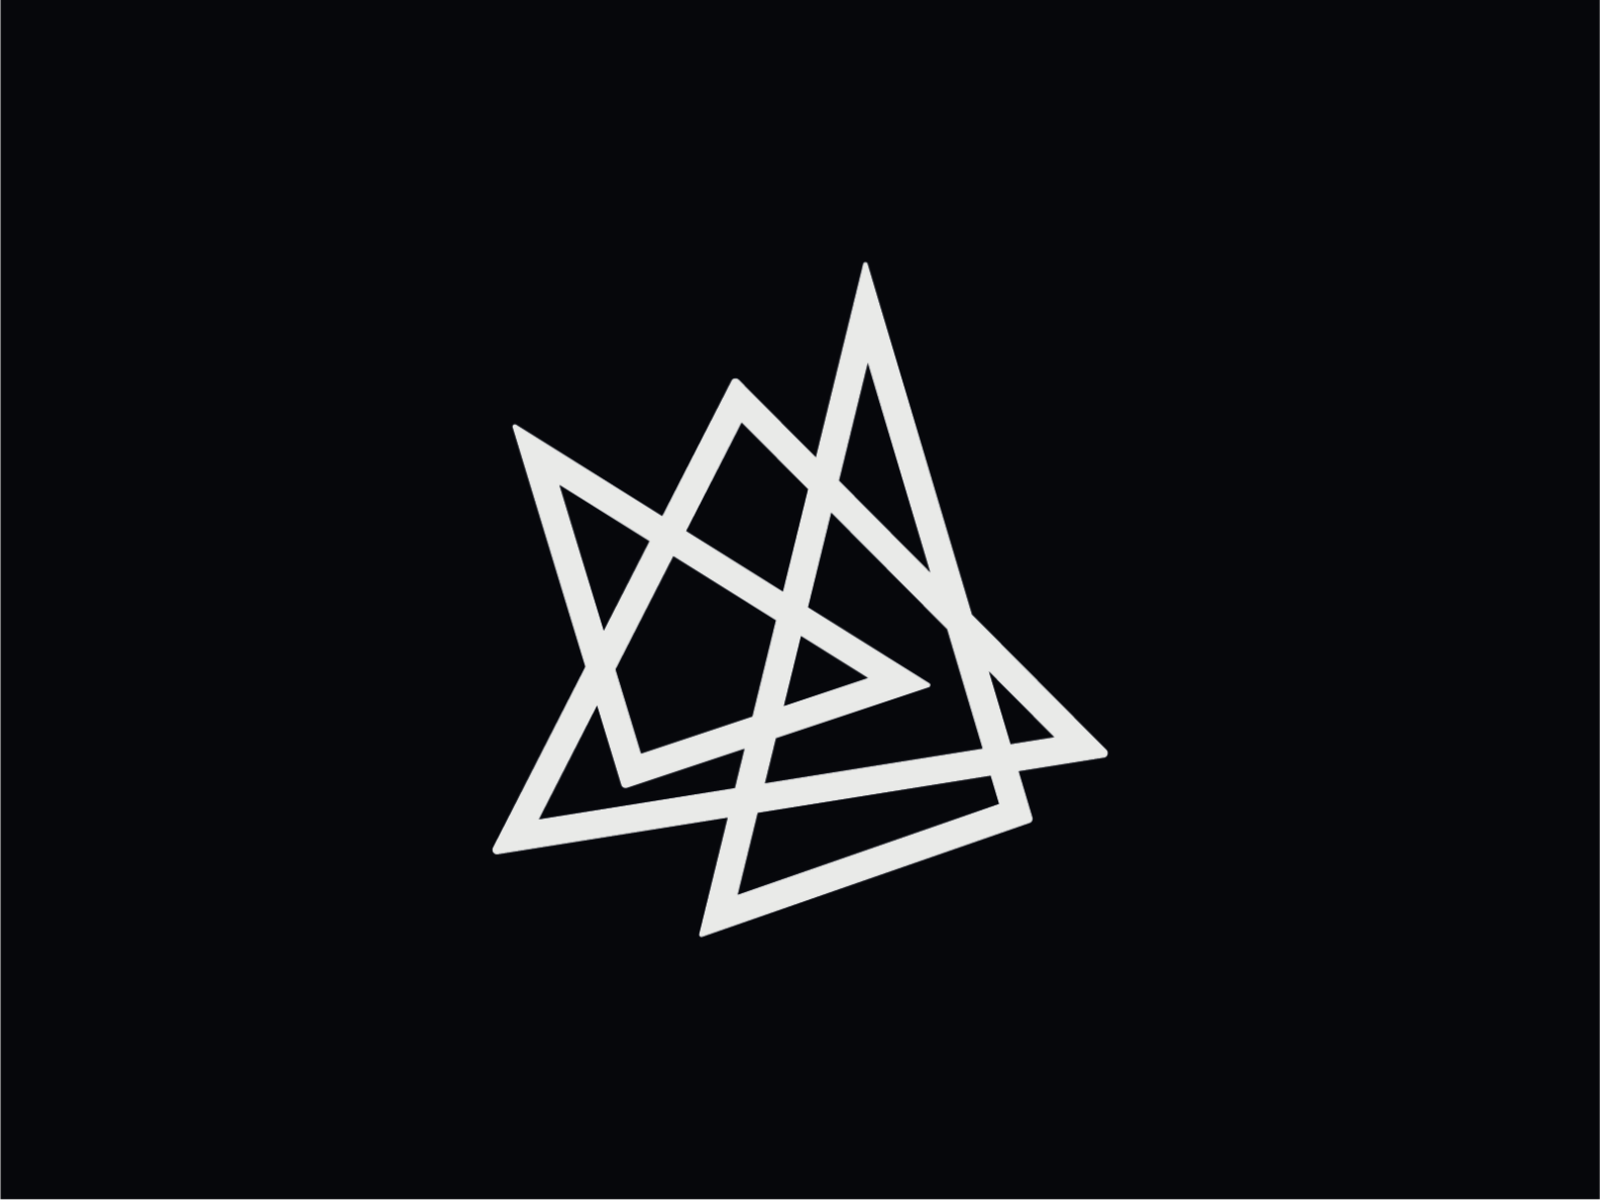 WW040 - Triangle 4 by Connor Fowler (.com) on Dribbble